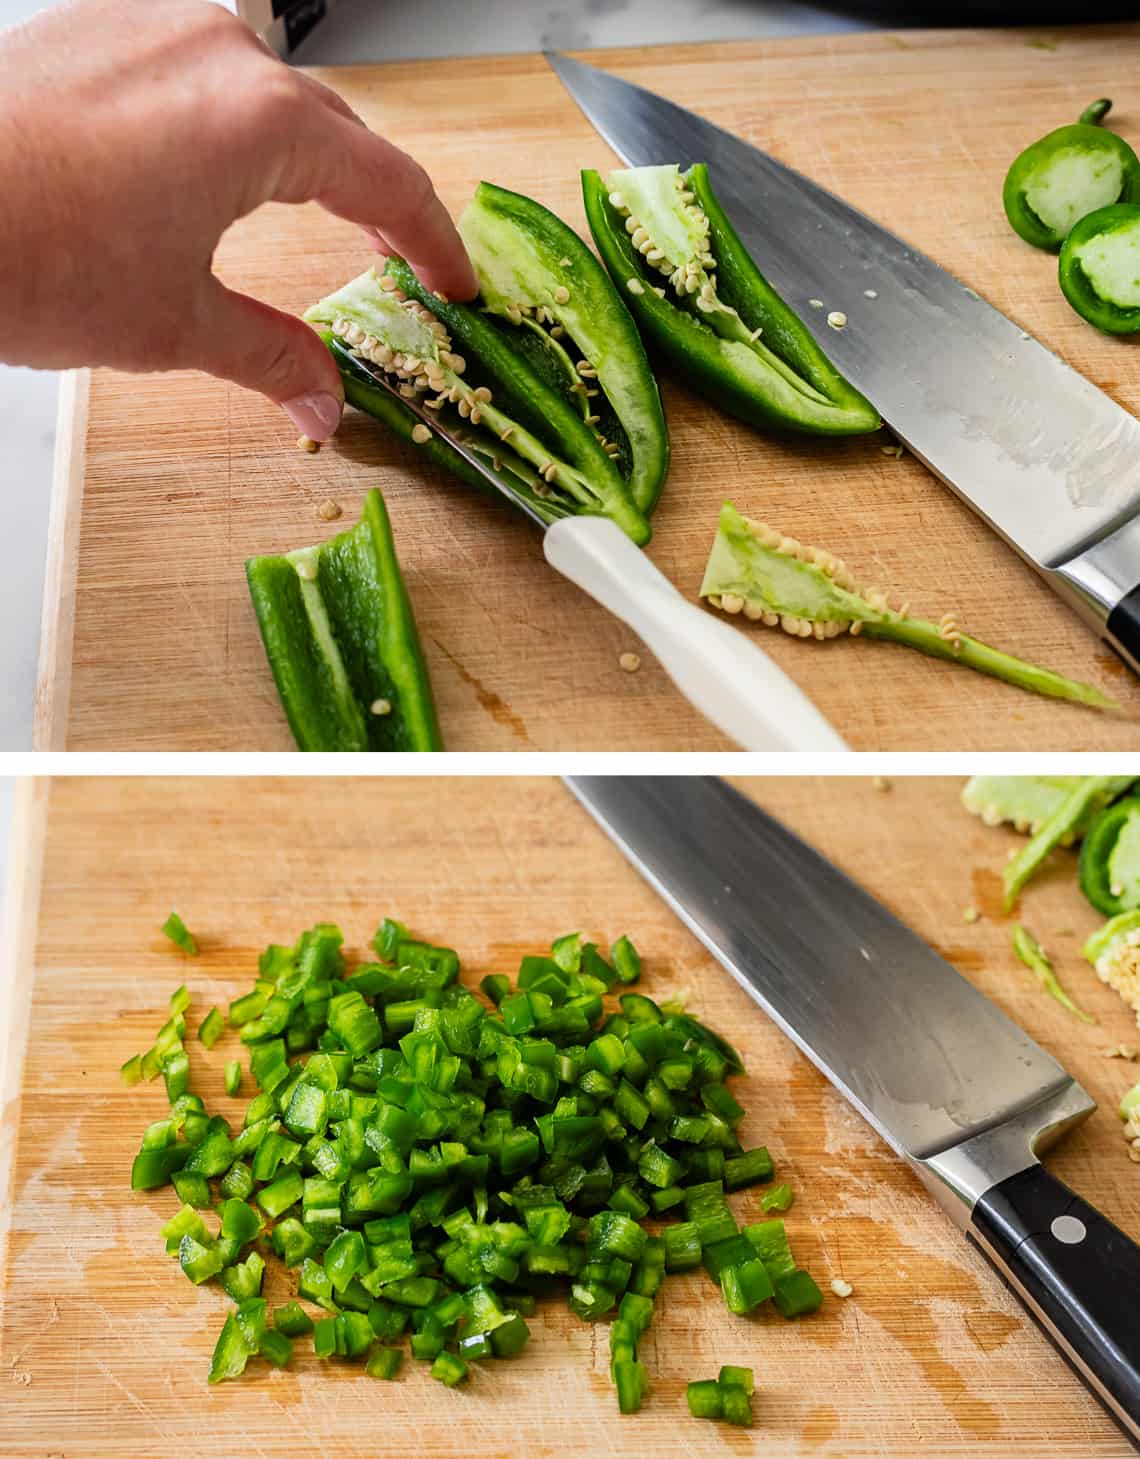 slicing the membranes out of fresh jalapeños and dicing them small.